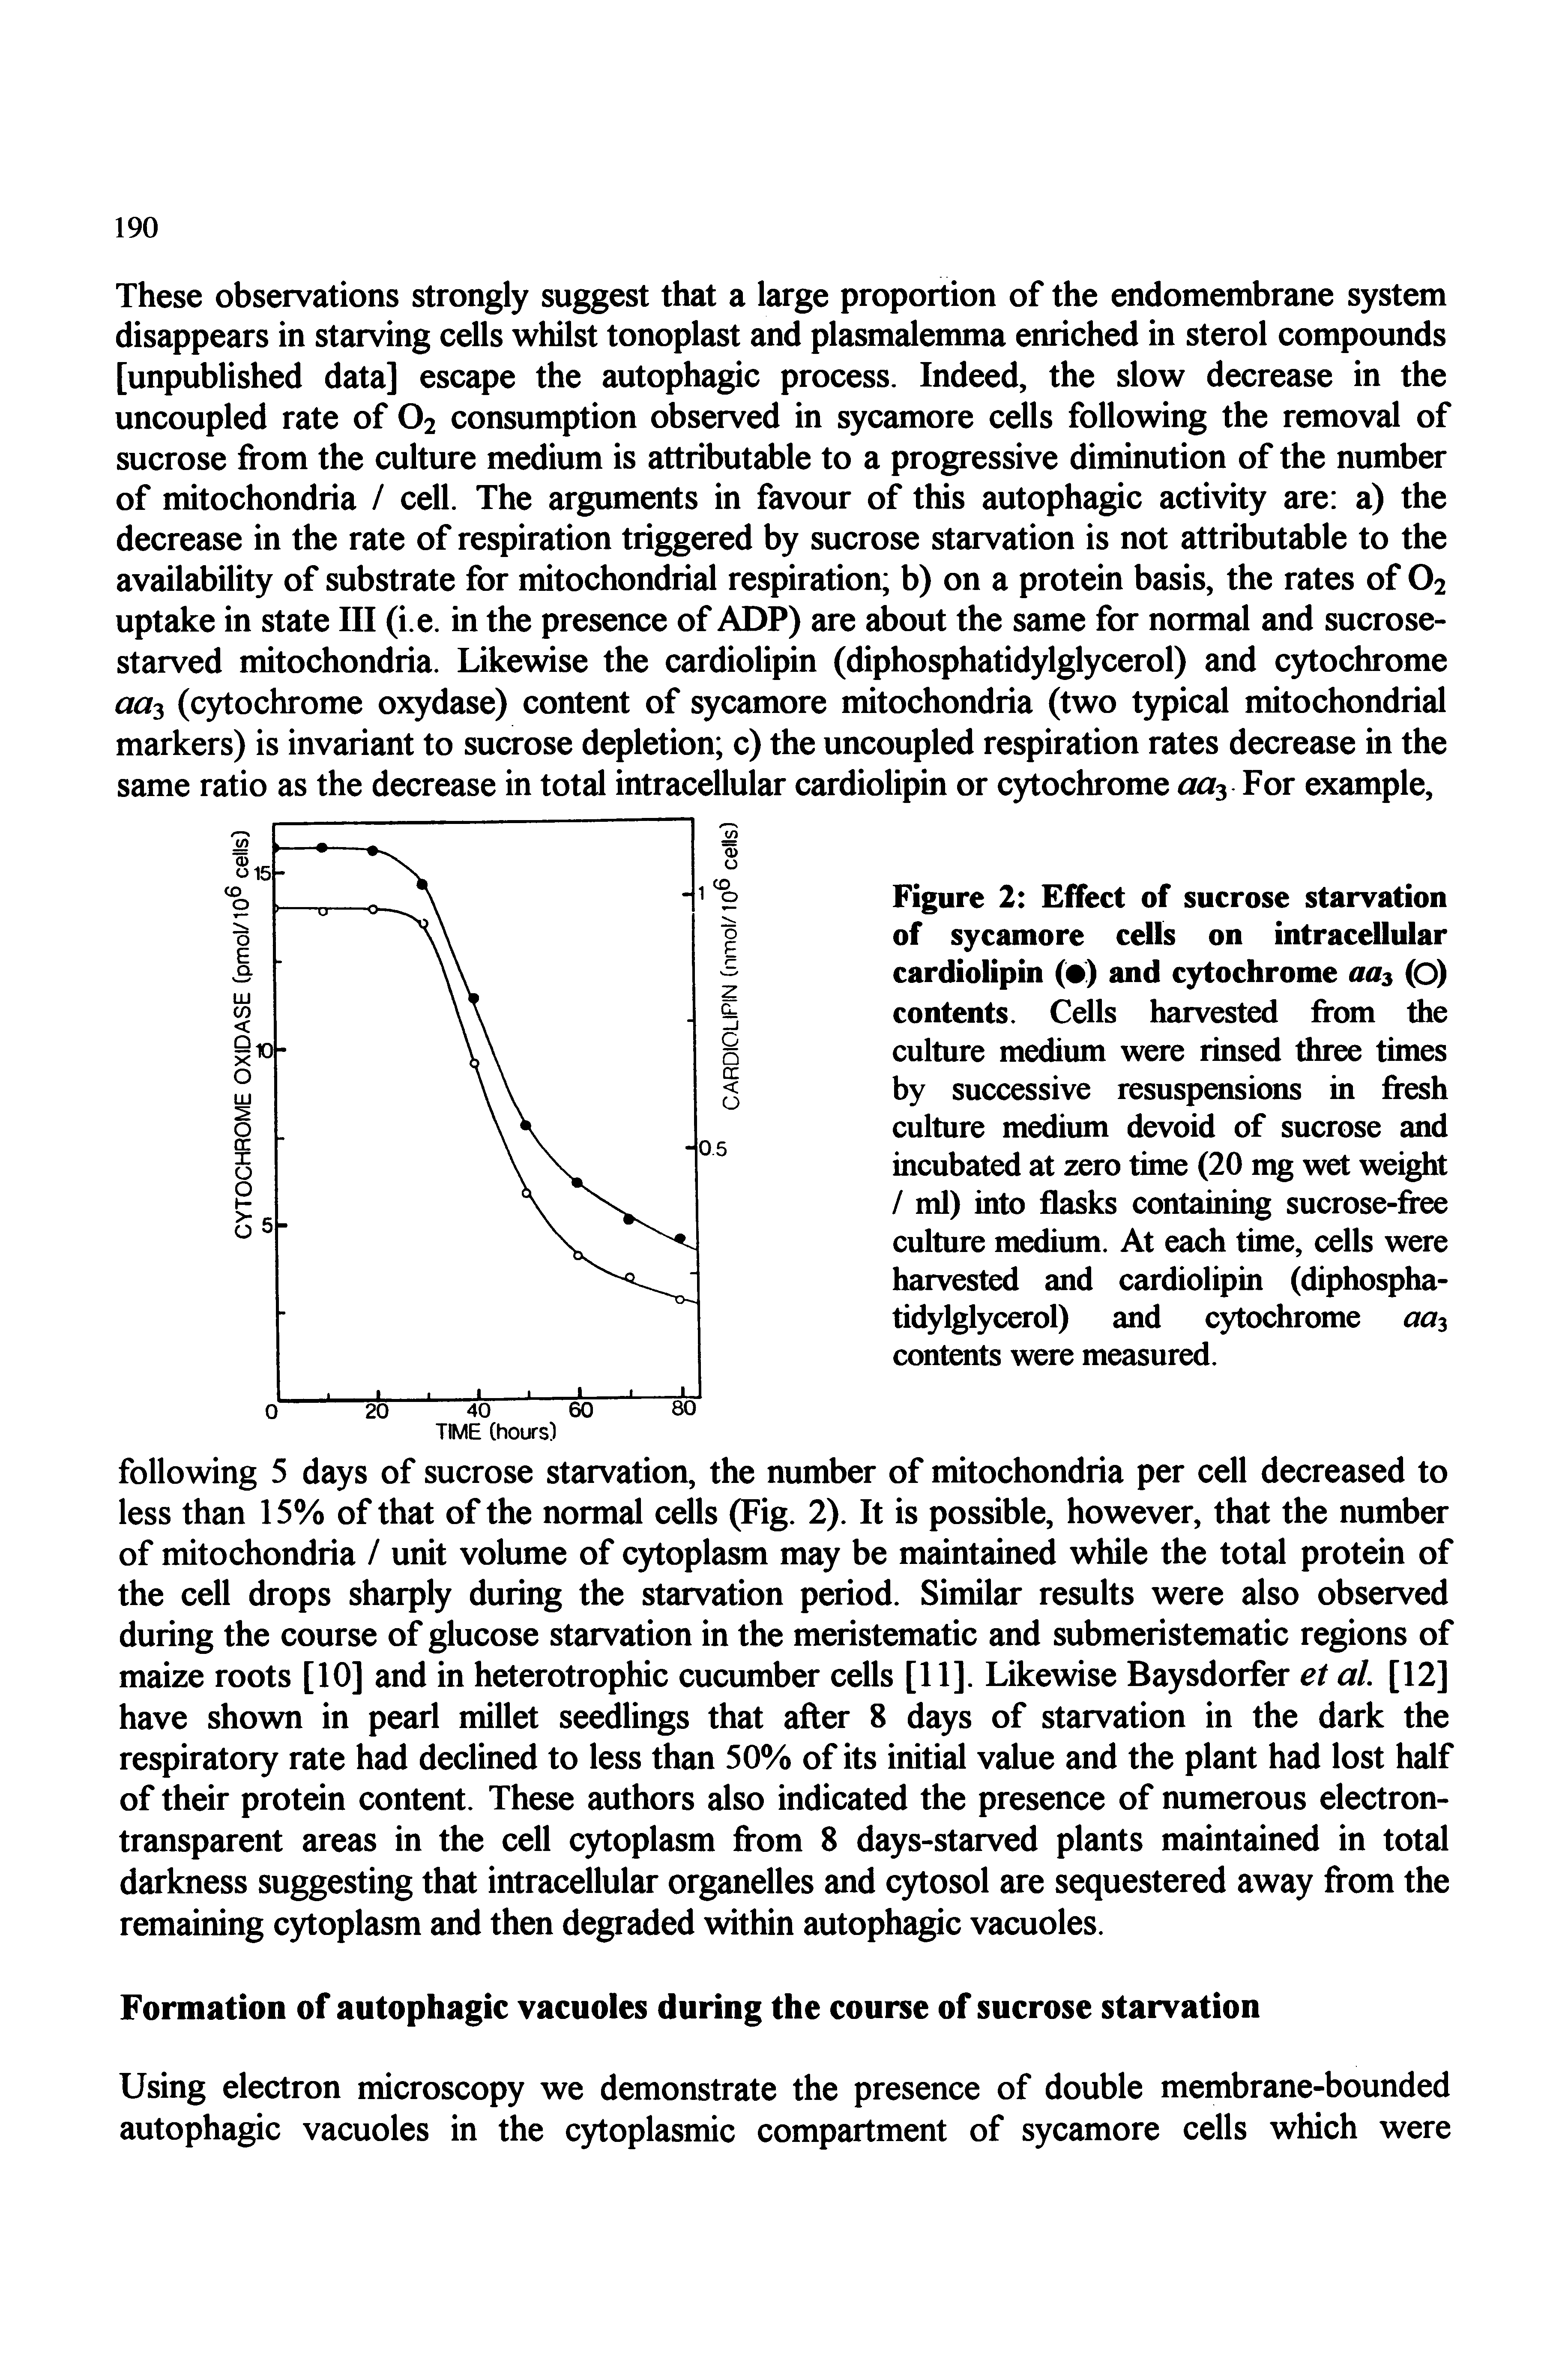 Figure 2 Effect of sucrose starvation of sycamore cells on intracellular cardiolipin ( ) and cytochrome aa (O) contents. Cells harvested from the culture medium were rinsed three times by successive resuspensions in fresh culture medium devoid of sucrose and incubated at zero time (20 mg wet weight / ml) into flasks containing sucrose-free culture medium. At each time, cells were harvested and cardiolipin (diphosphatidylglycerol) and cytochrome aa contents were measured.